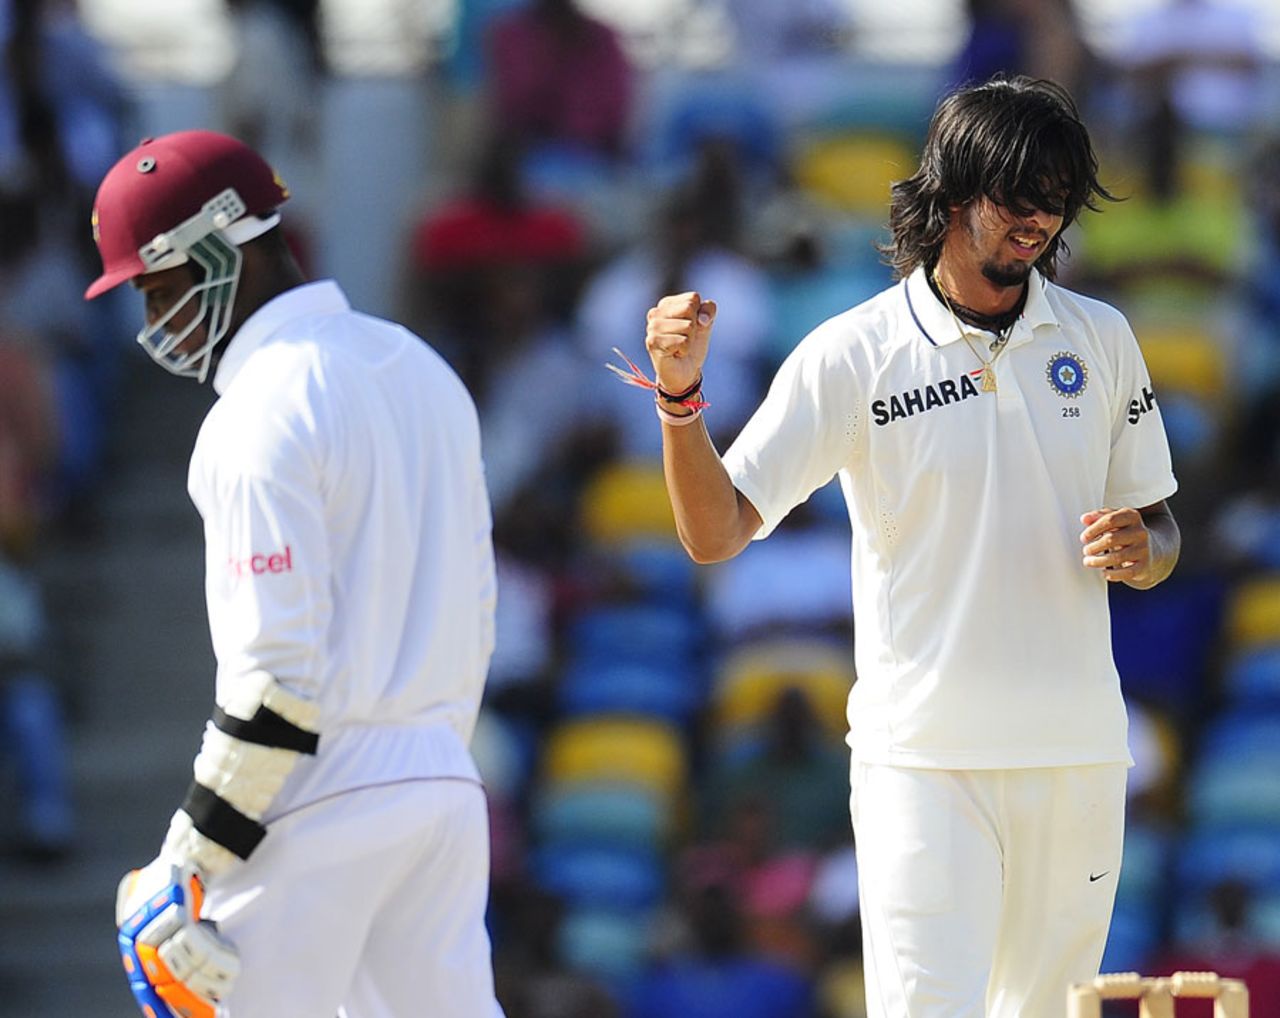 Ishant Sharma picks up his ninth wicket of the match - Marlon Samuels, West Indies v India, 2nd Test, Bridgetown, 5th day, July 2, 2011 